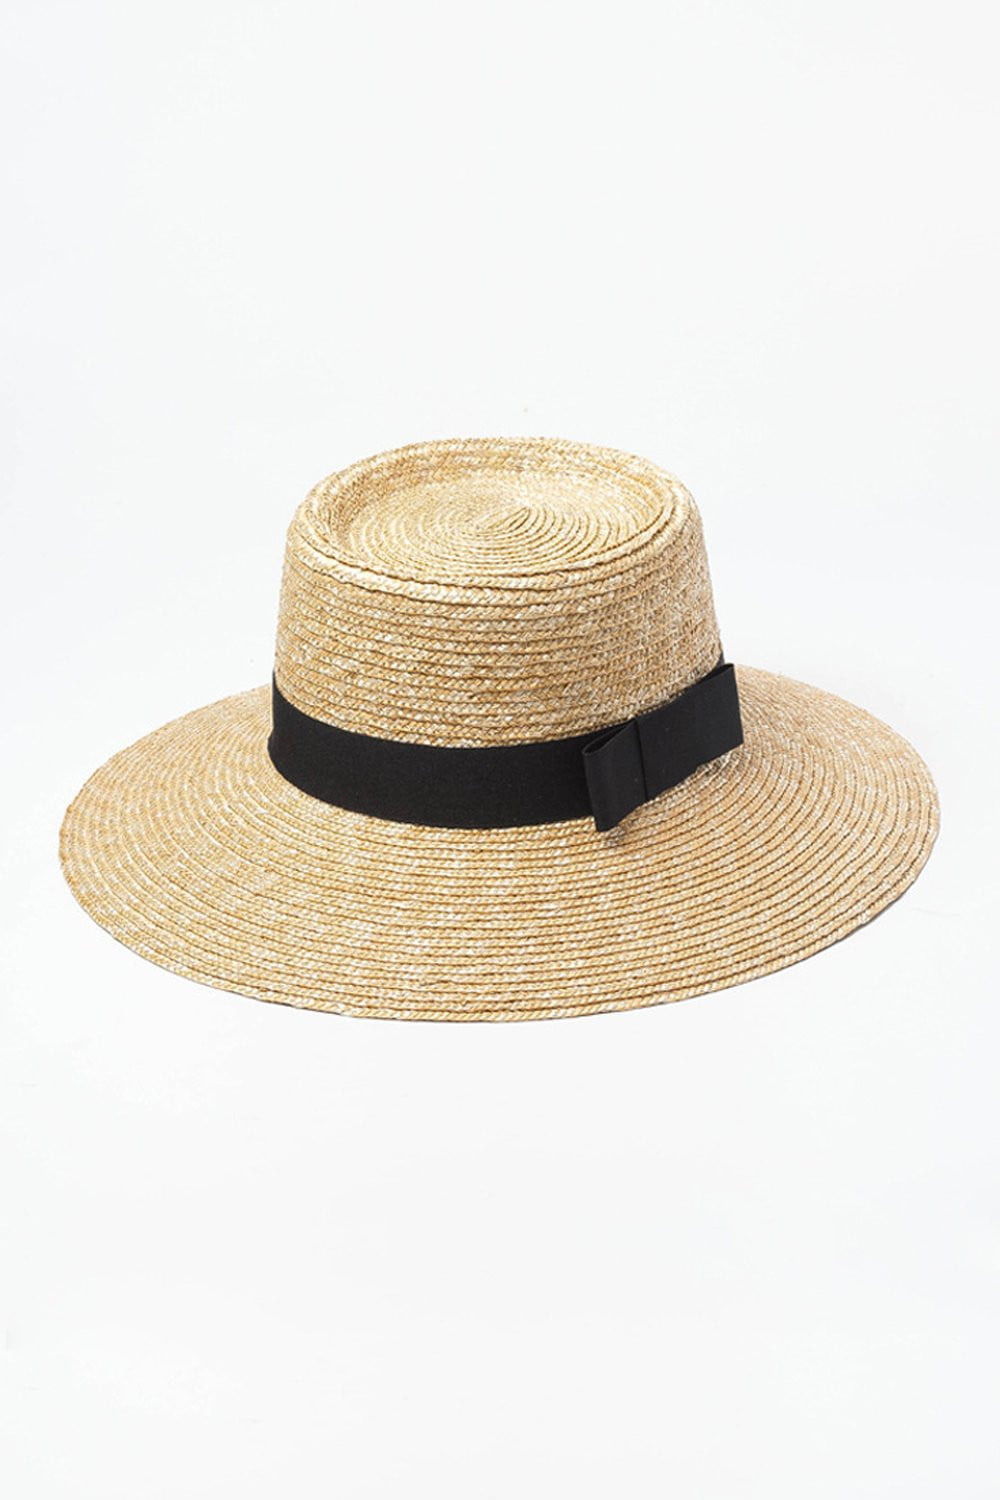 Black Bow Trimmed Wheat Straw Flat Boater (2207890079803)